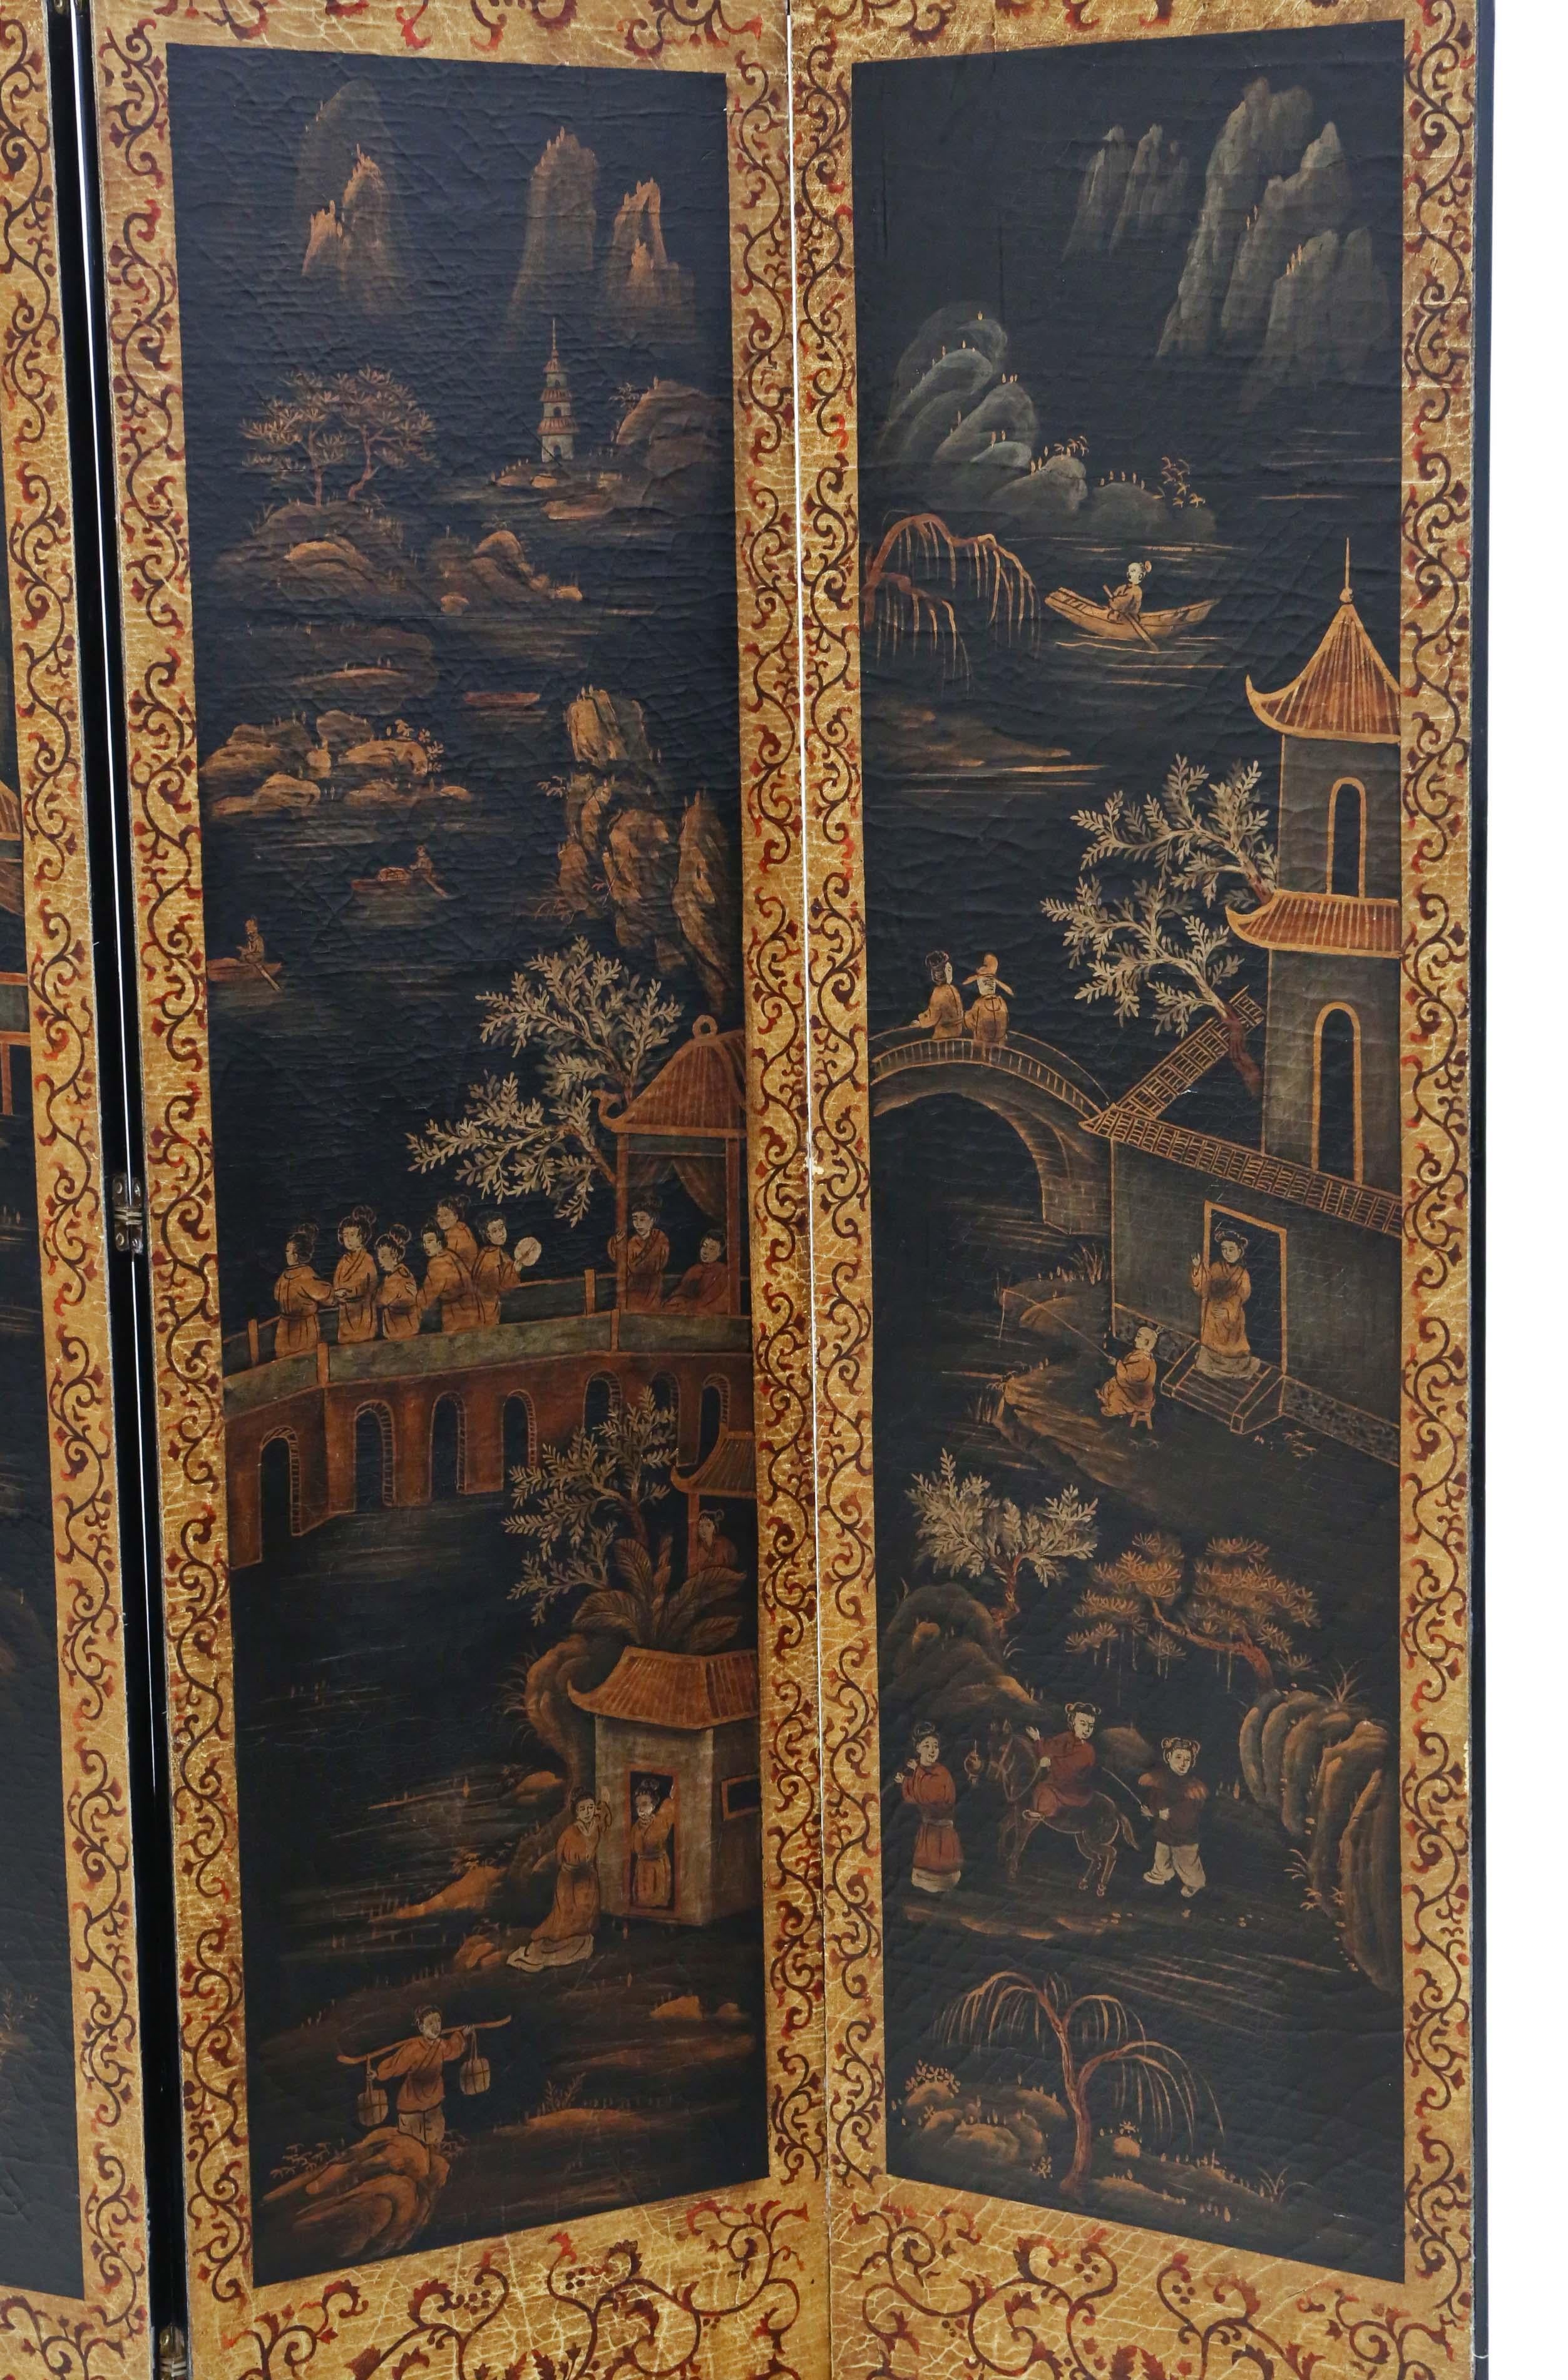 Chinoiserie circa 1915 dressing screen room divider. A very rare find.
Would look amazing in the right location, very old with a lovely age, color and patina. No woodworm.
Overall maximum dimensions: 4 panels 46cm wide, 186cm high, 2.5cm thick.